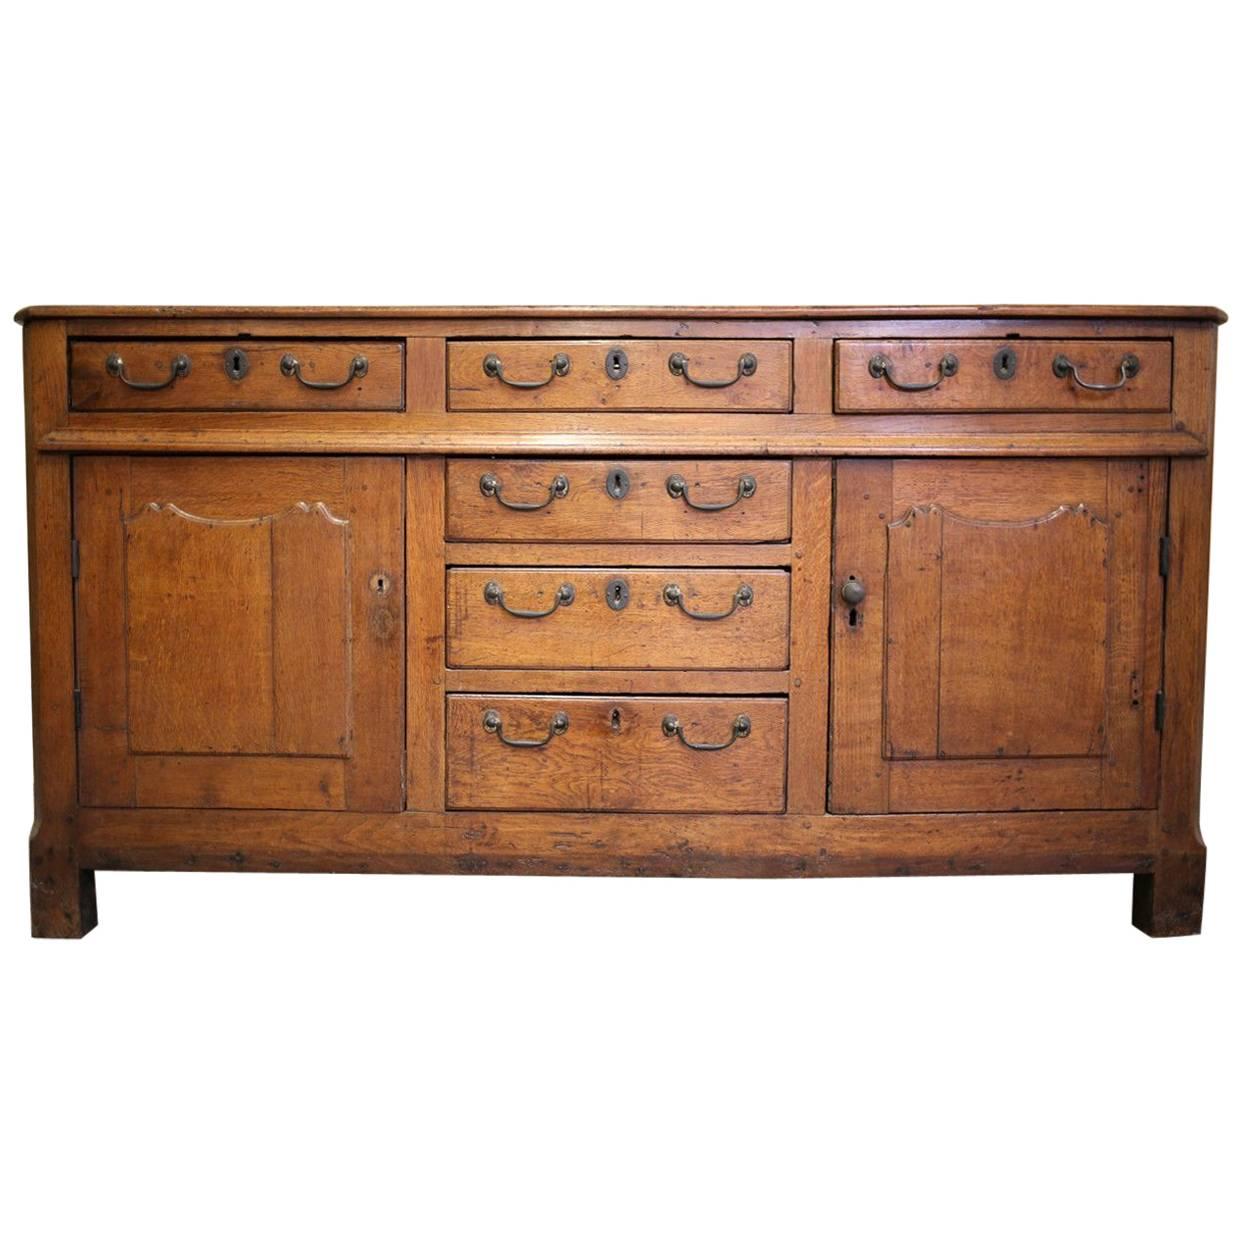 18th Century Italian Sideboard, Cabinet with Drawers, Original Hardware